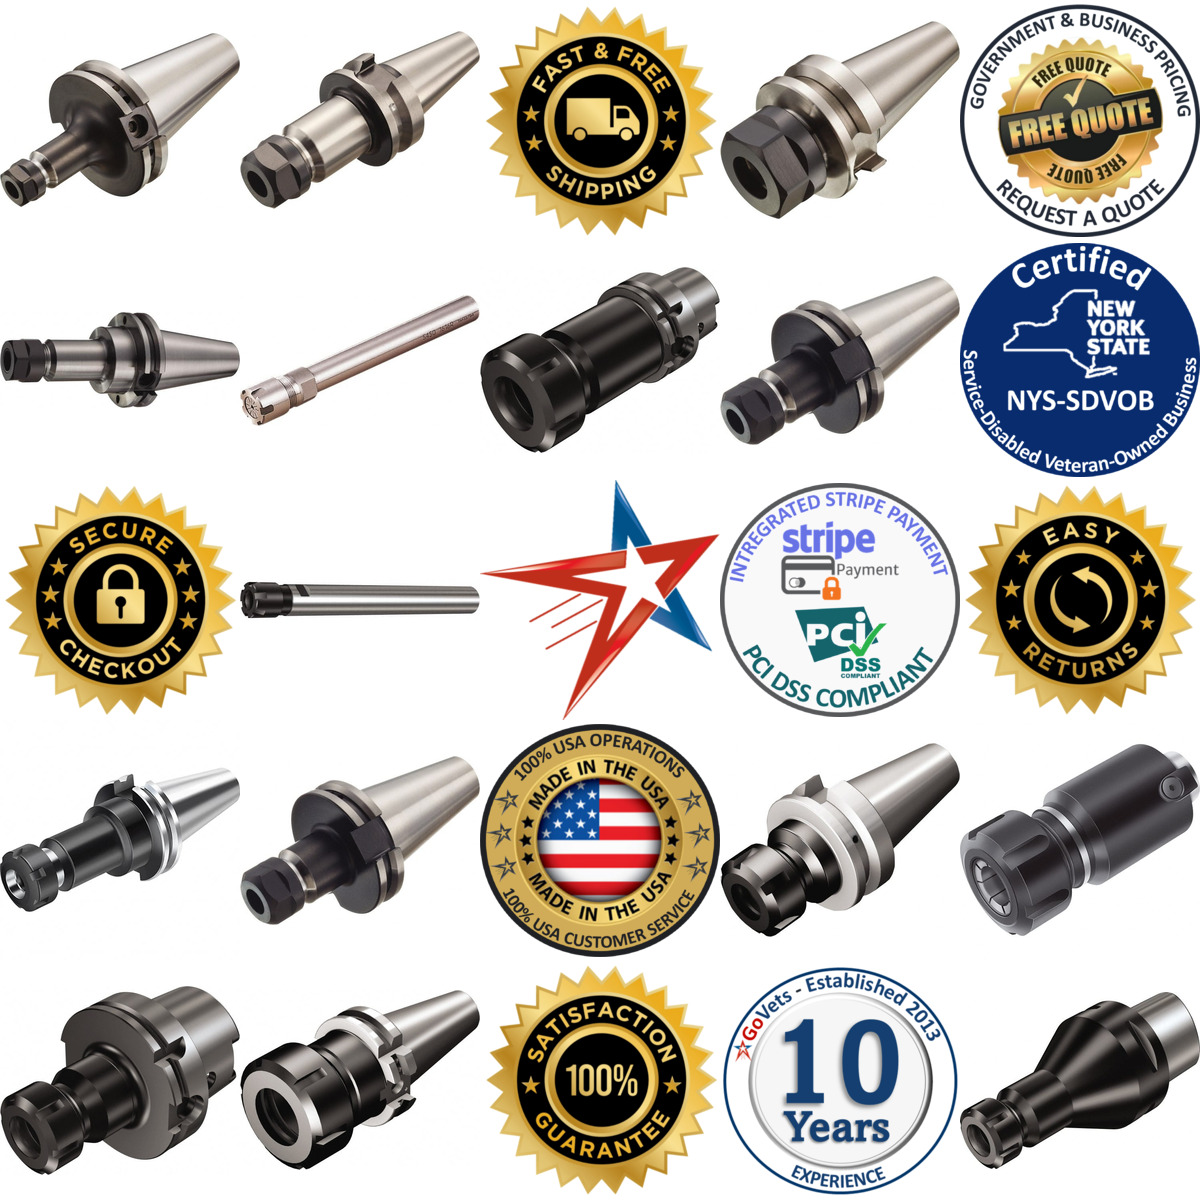 A selection of Modular Tool Holding System Adapters products on GoVets